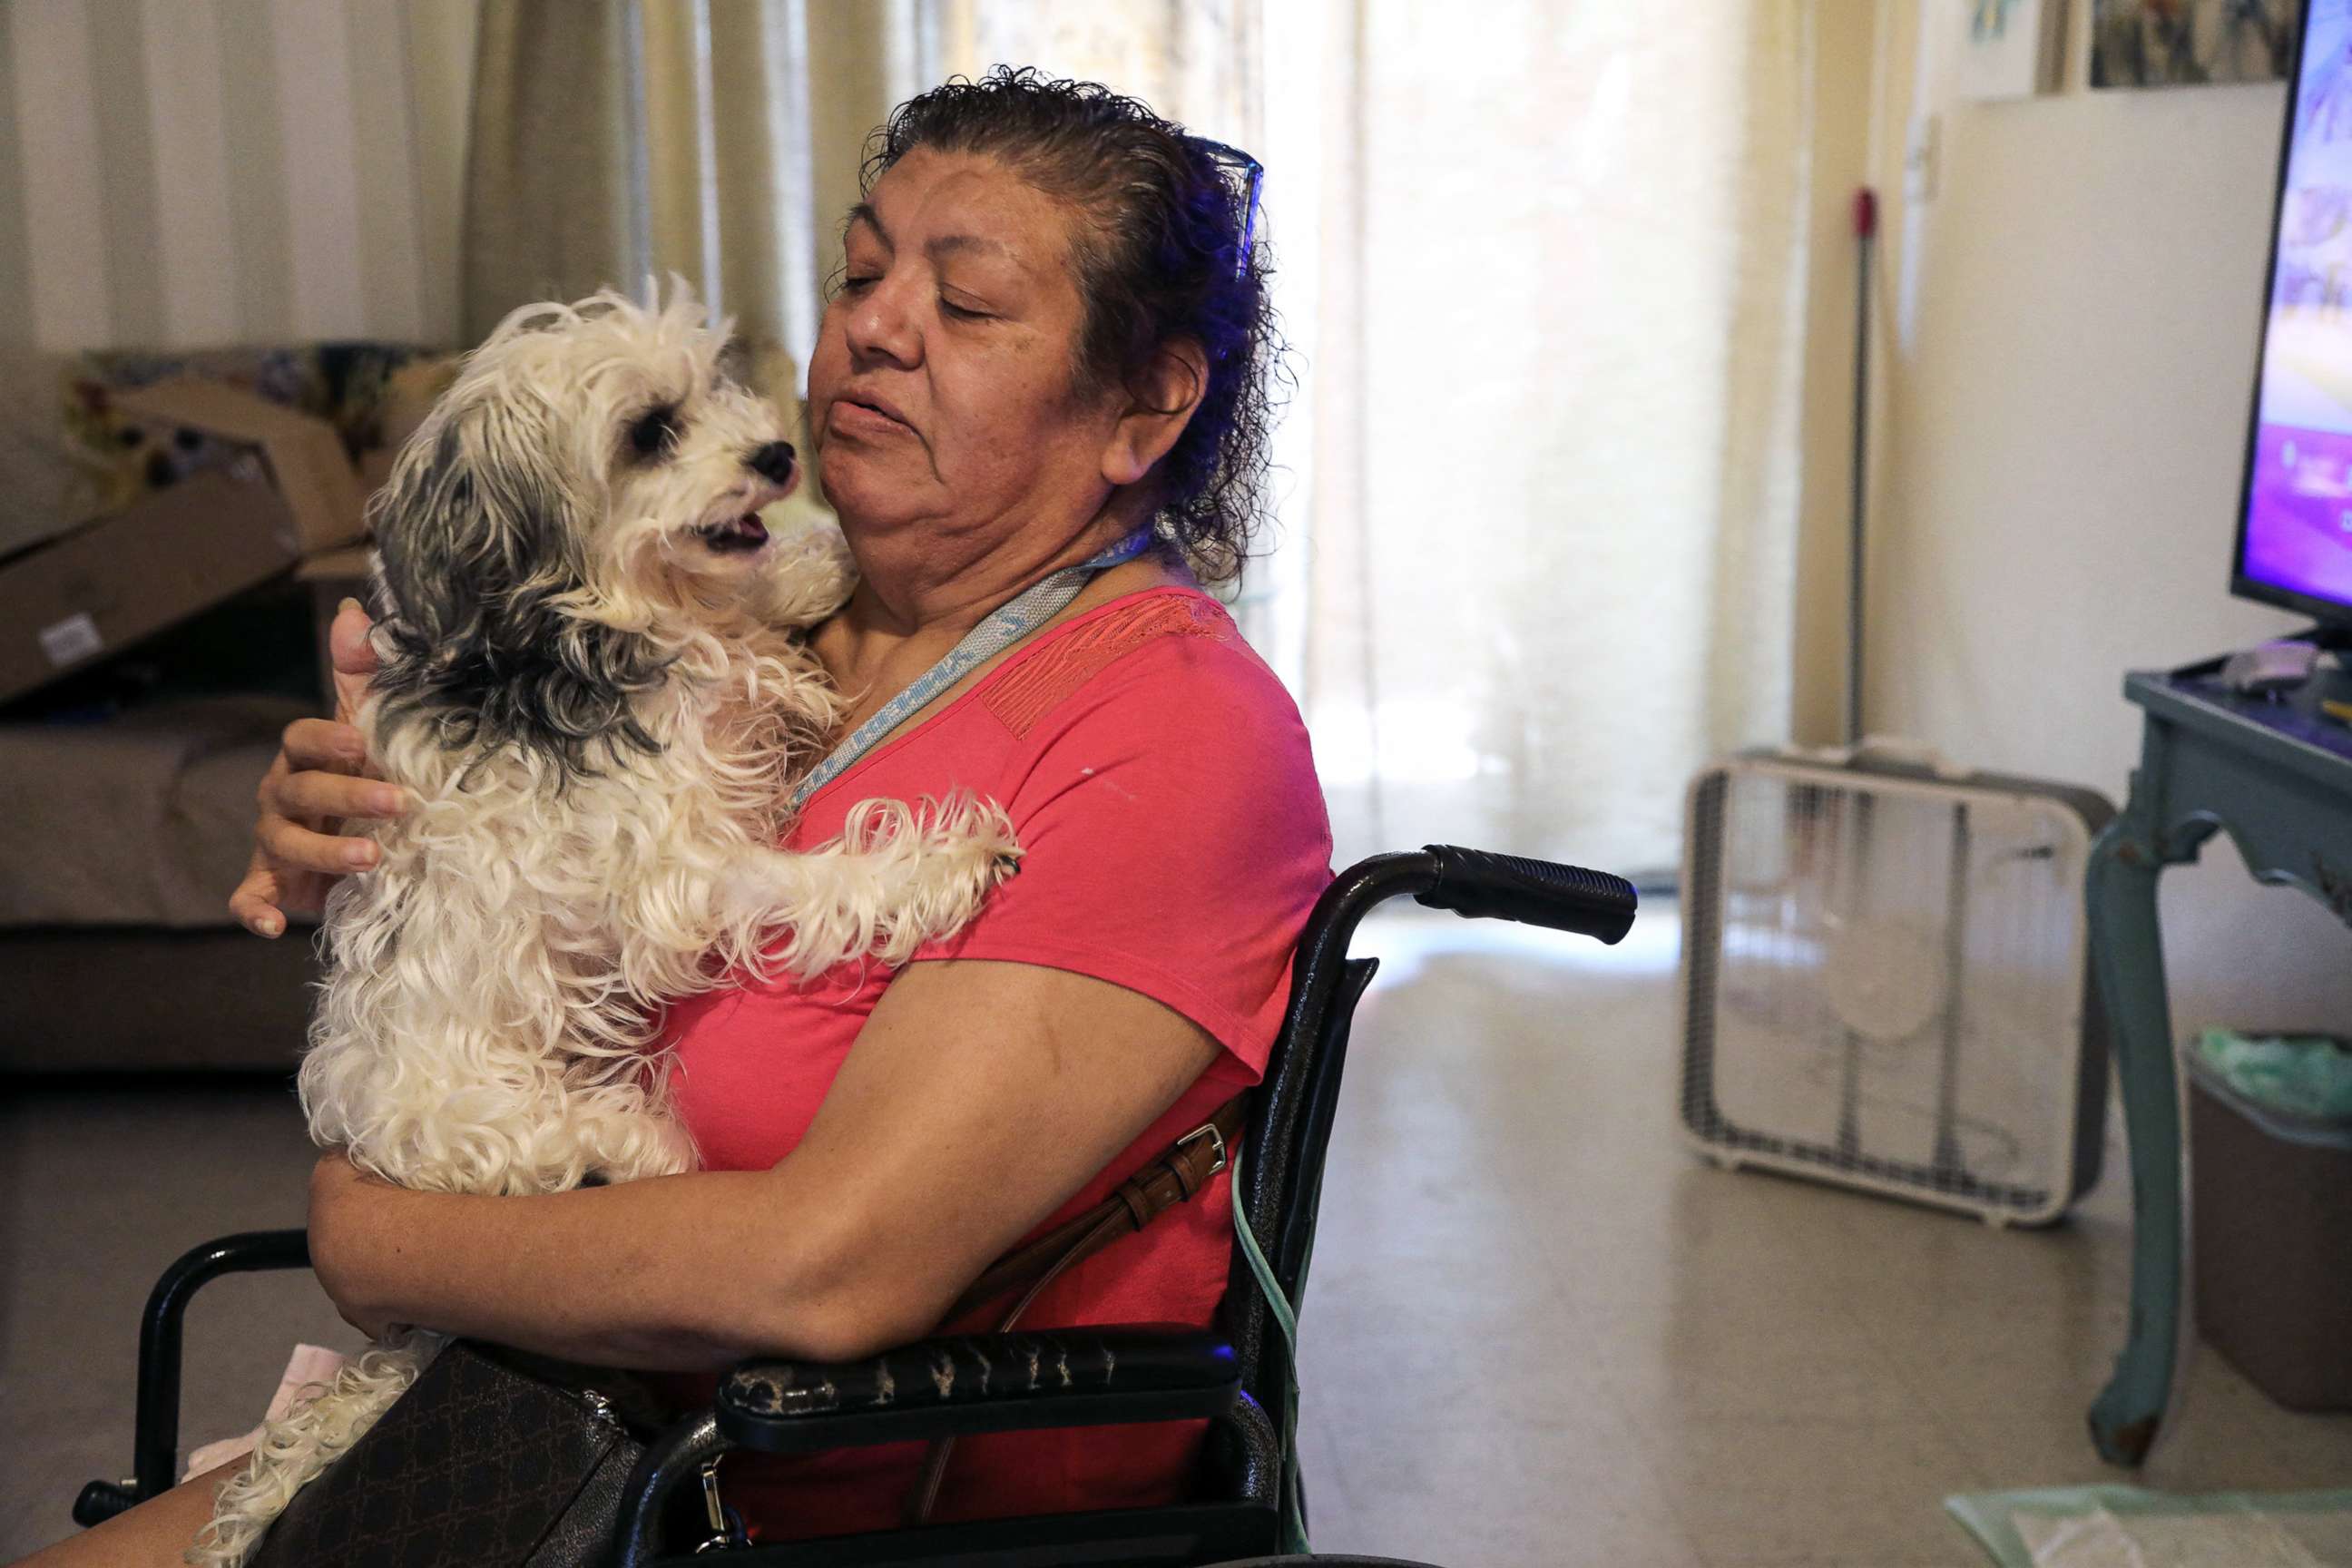 PHOTO: Juanita Alarcon holds her dog, Chloe, near a newly donated fan to help cope with the heat, in San Antonio, Texas, July 11, 2022.